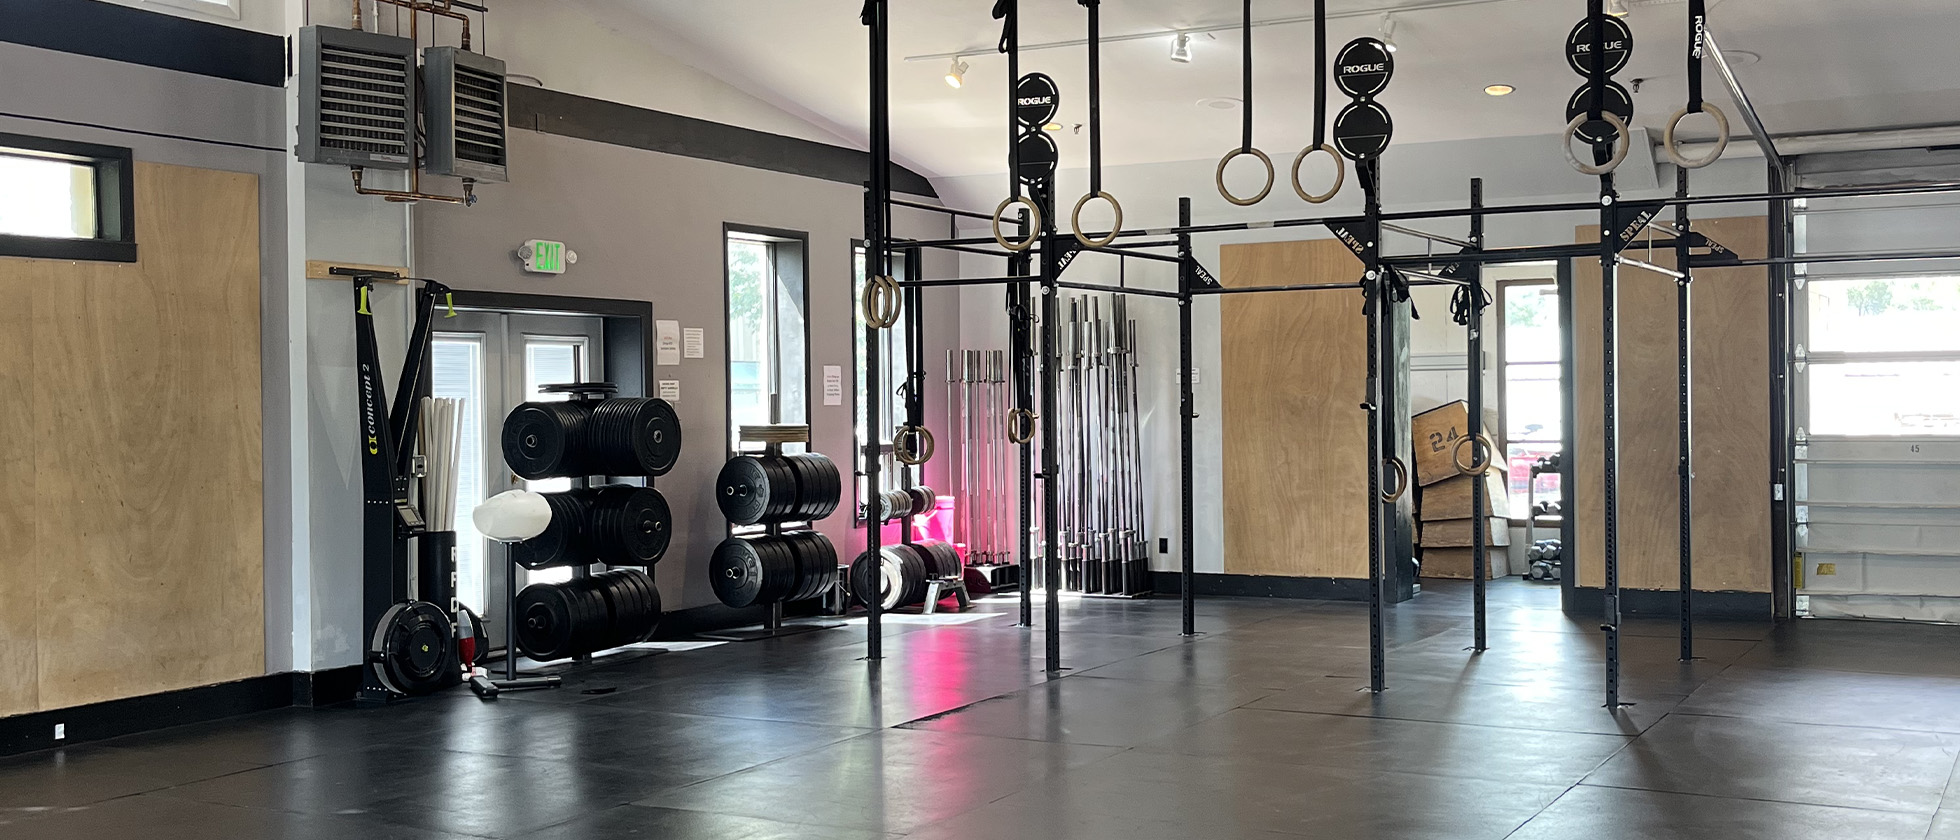 Check Out Our Gym Near Aspen, CO